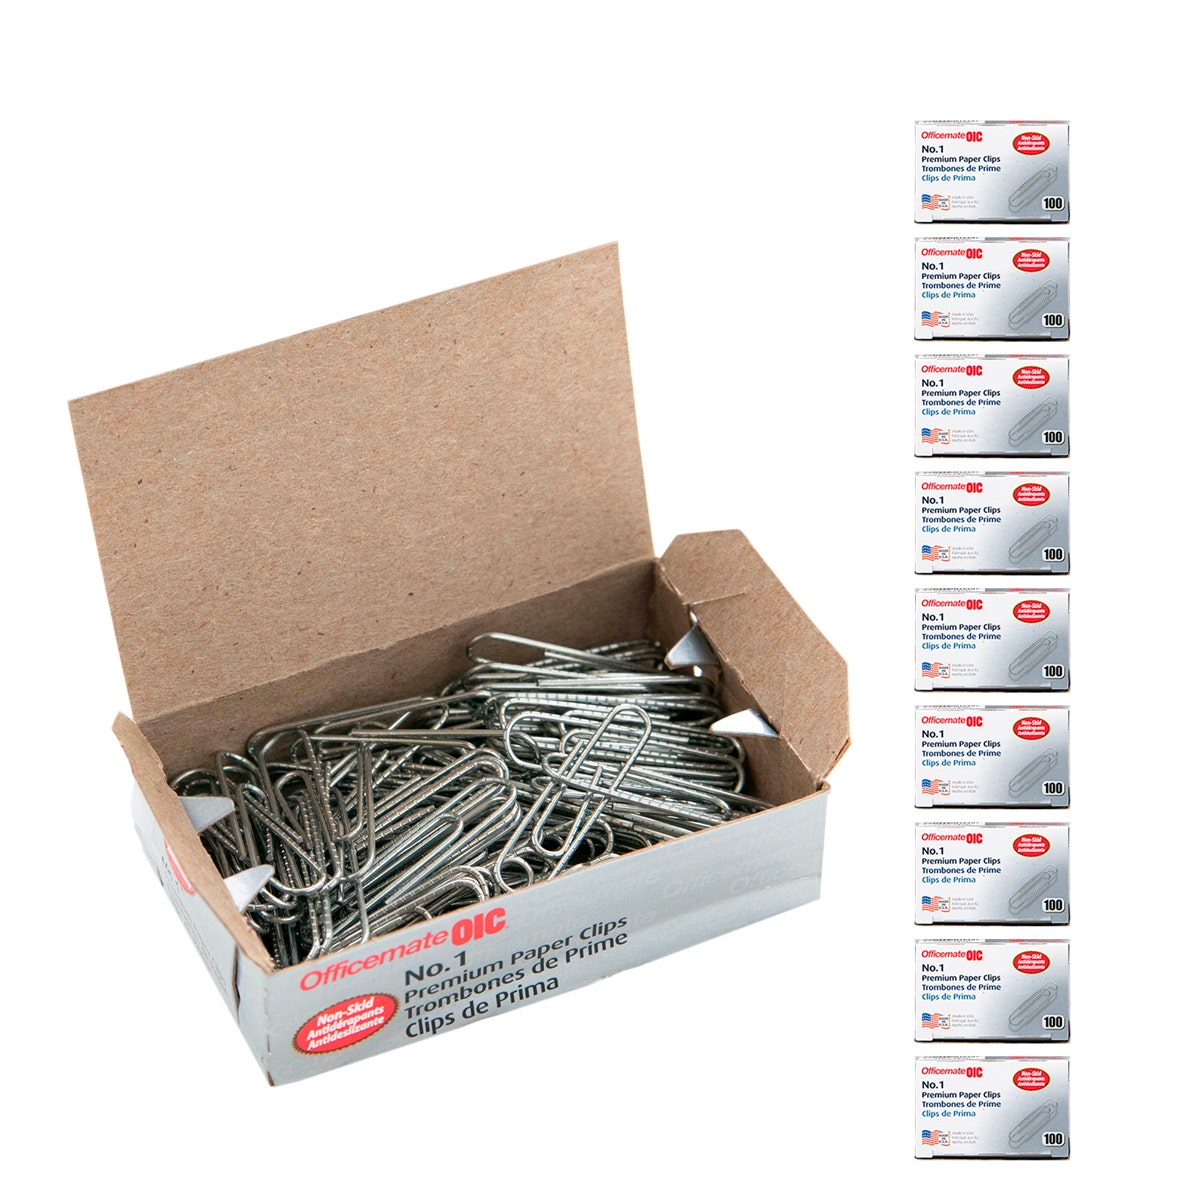 1000ct Officemate No. 1 Premium Paper Clips – Nonskid, Serrated